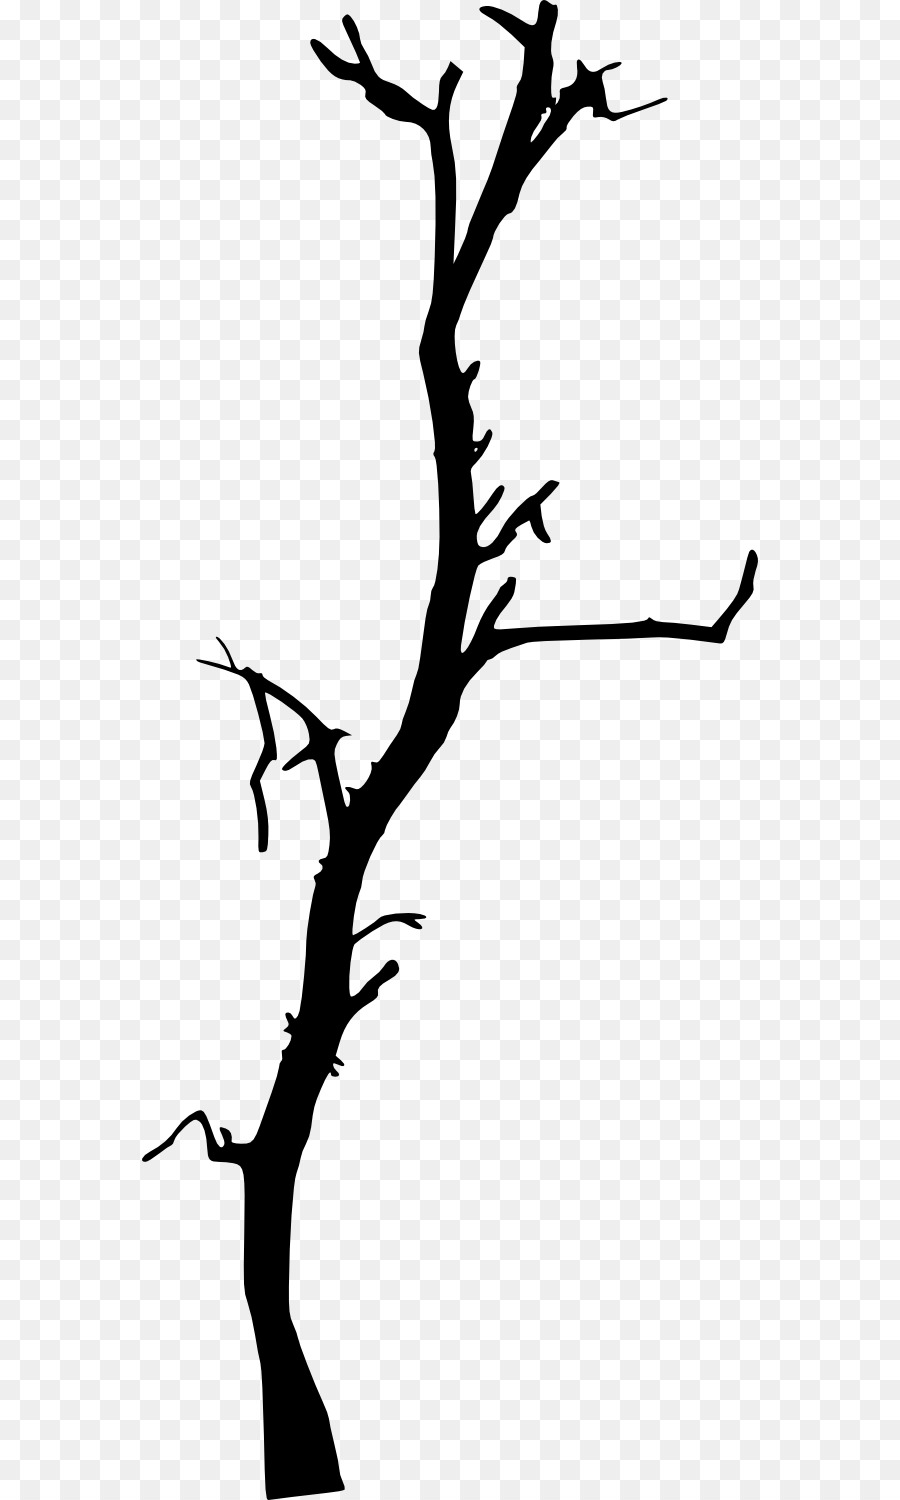 Portable Network Graphics Tree Clip art Branch Silhouette - dead tree png download - 616*1500 - Free Transparent Tree png Download.